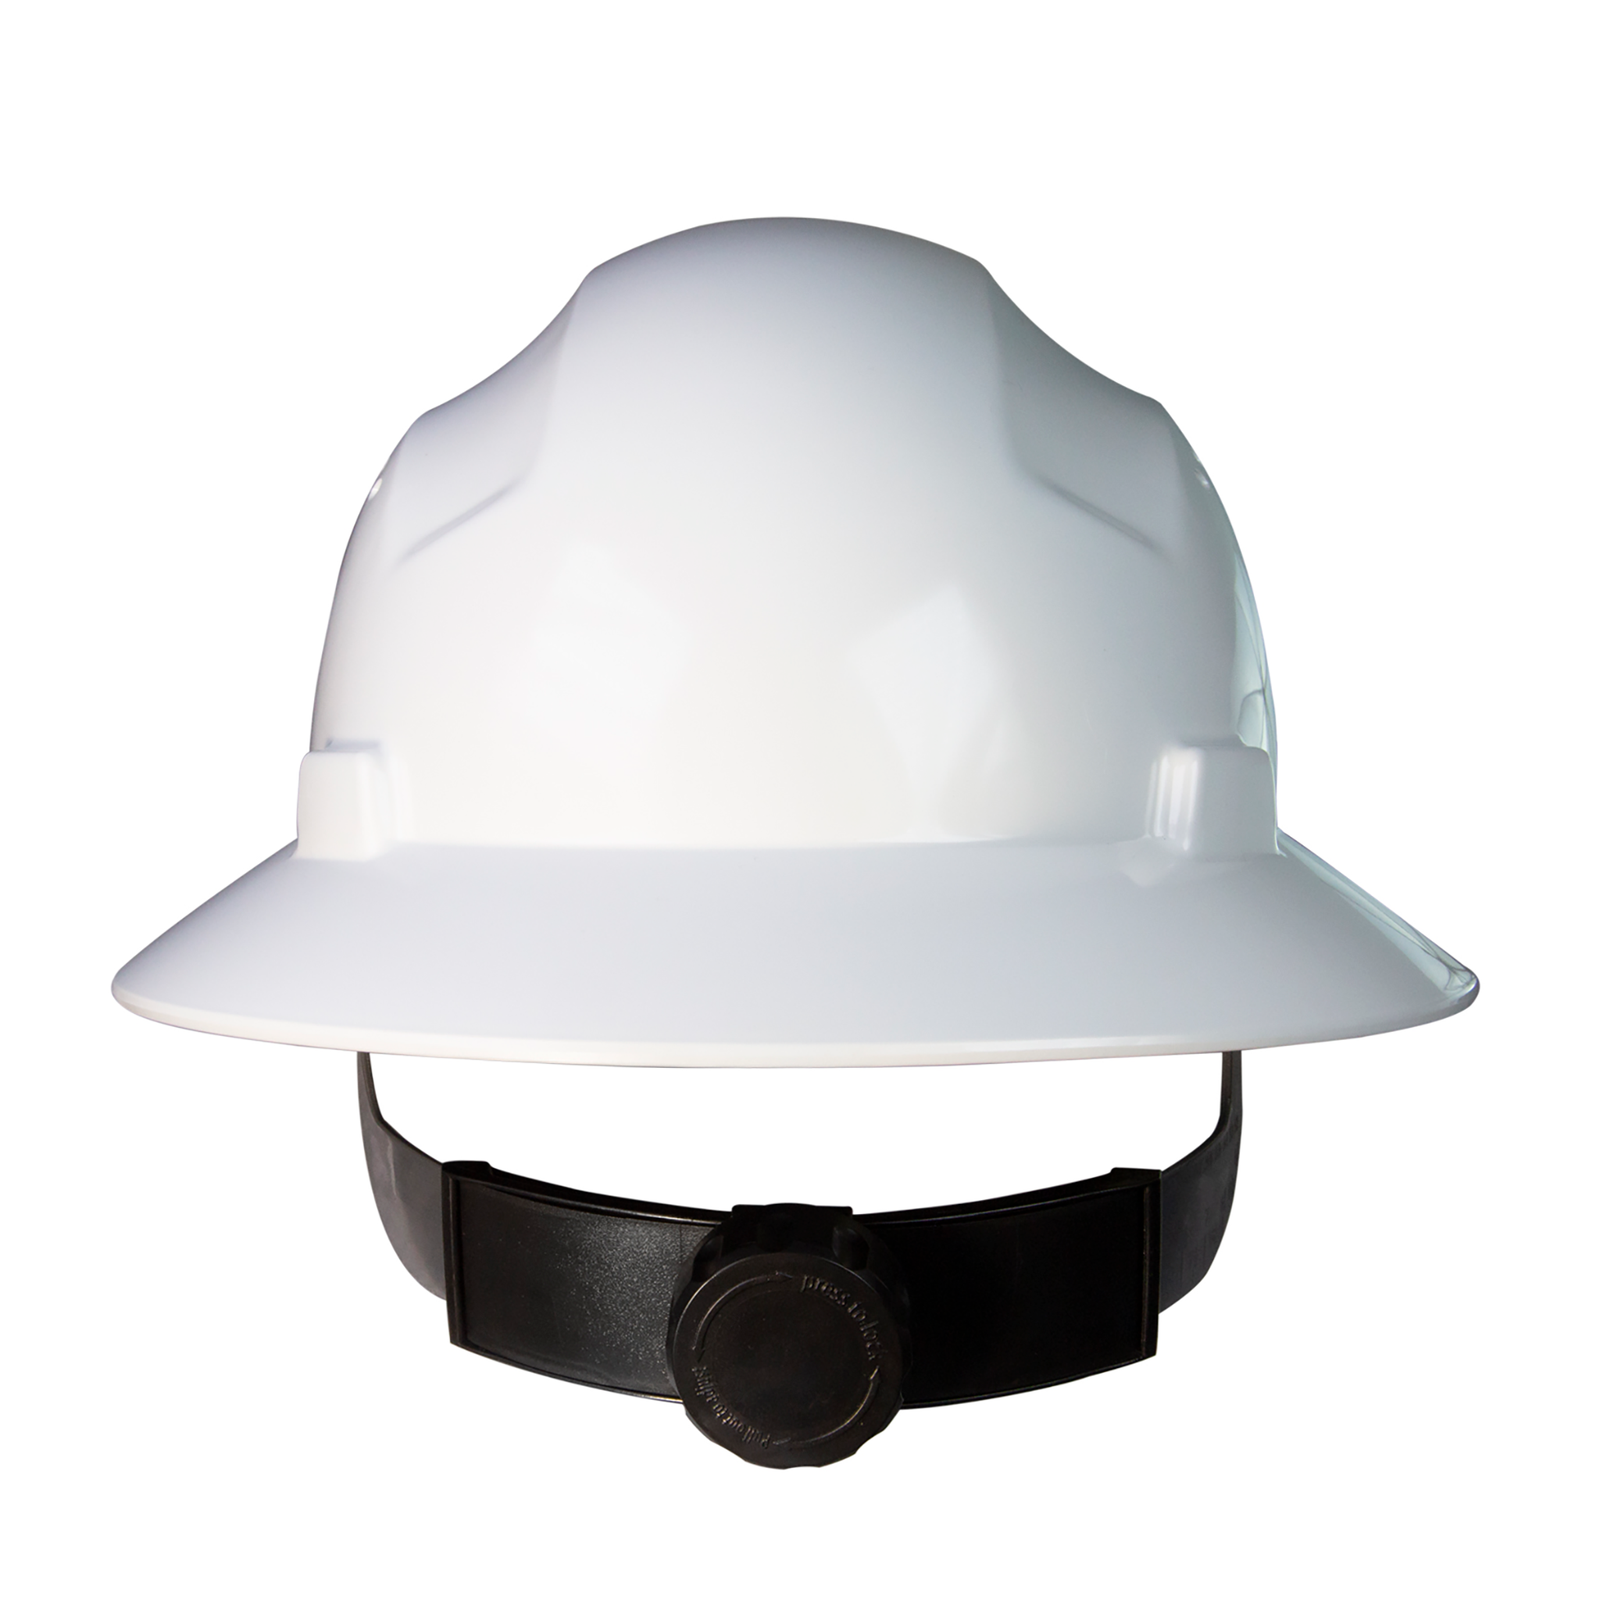 Full brim white safety hard hat with 4 point suspension and black ratchet